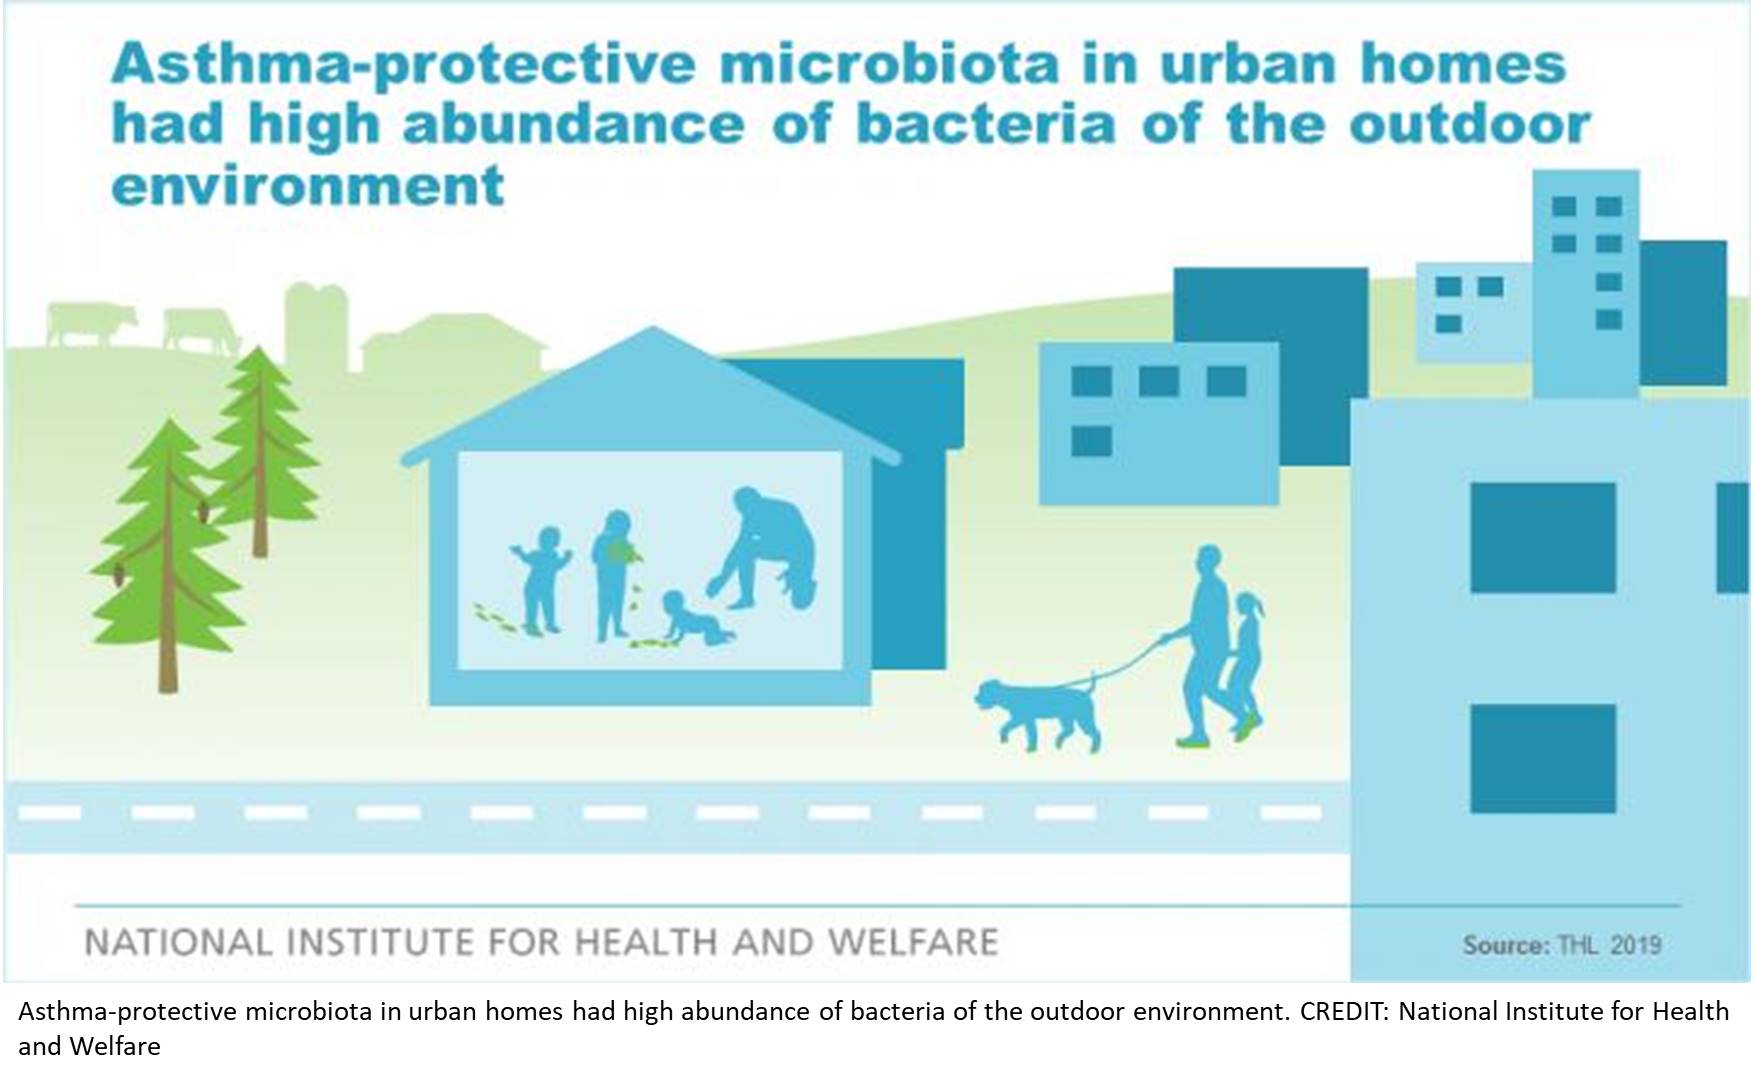 Farm-like indoor microbiota may protect children from asthma also in urban homes